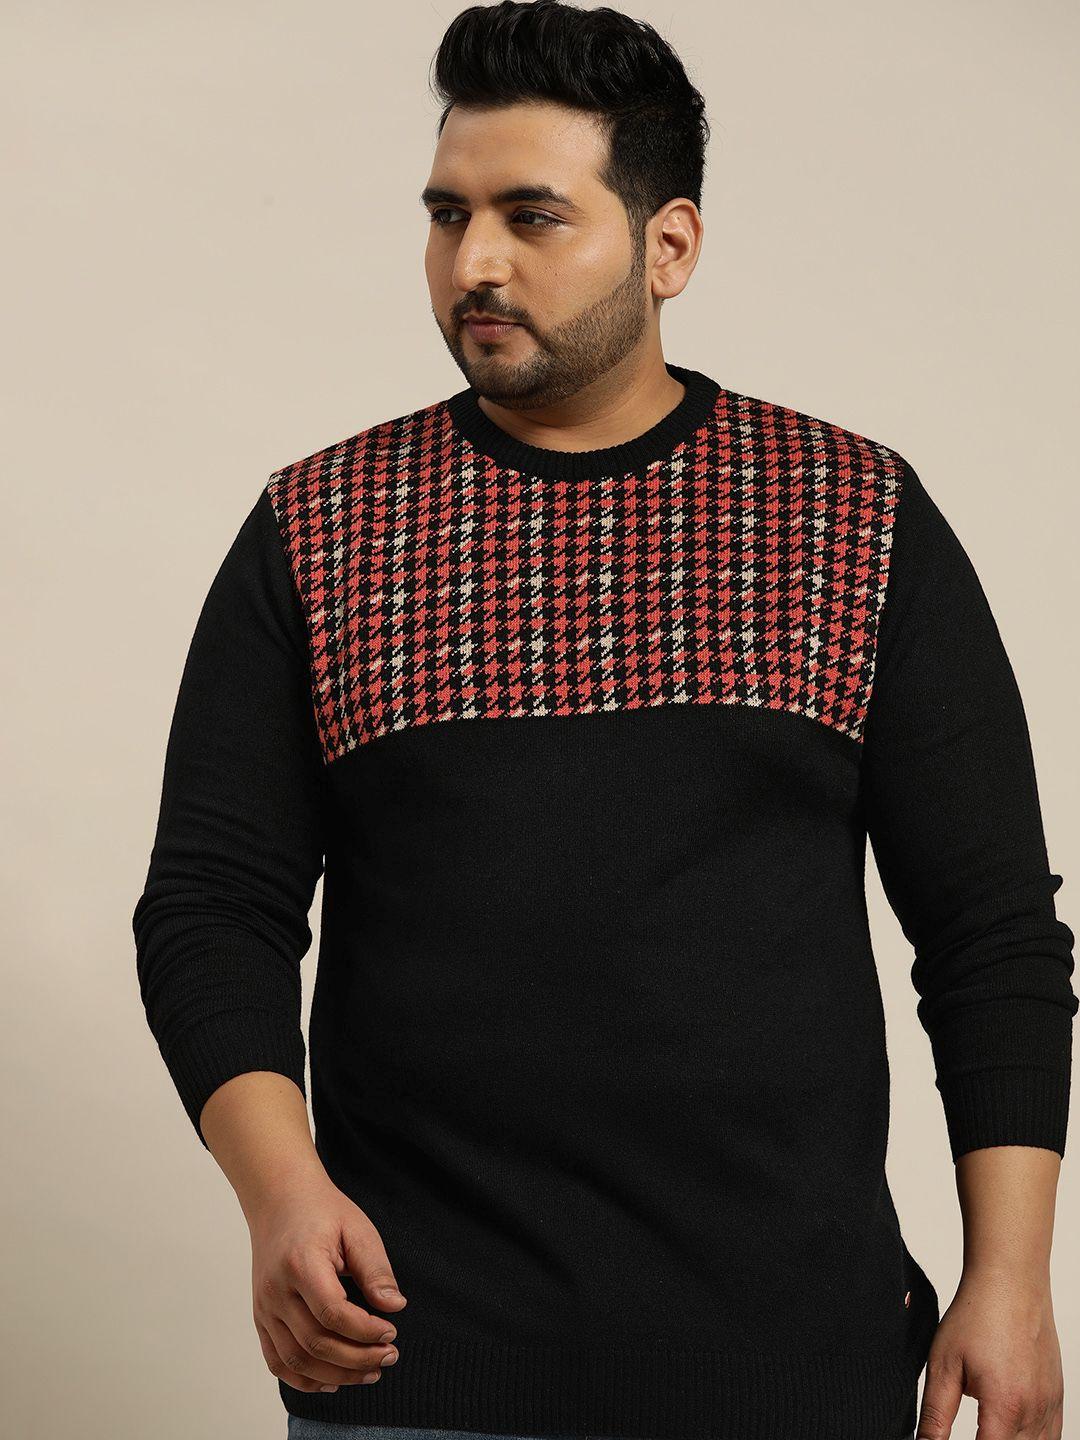 sztori men plus size black & coral red houndstooth acrylic sweater